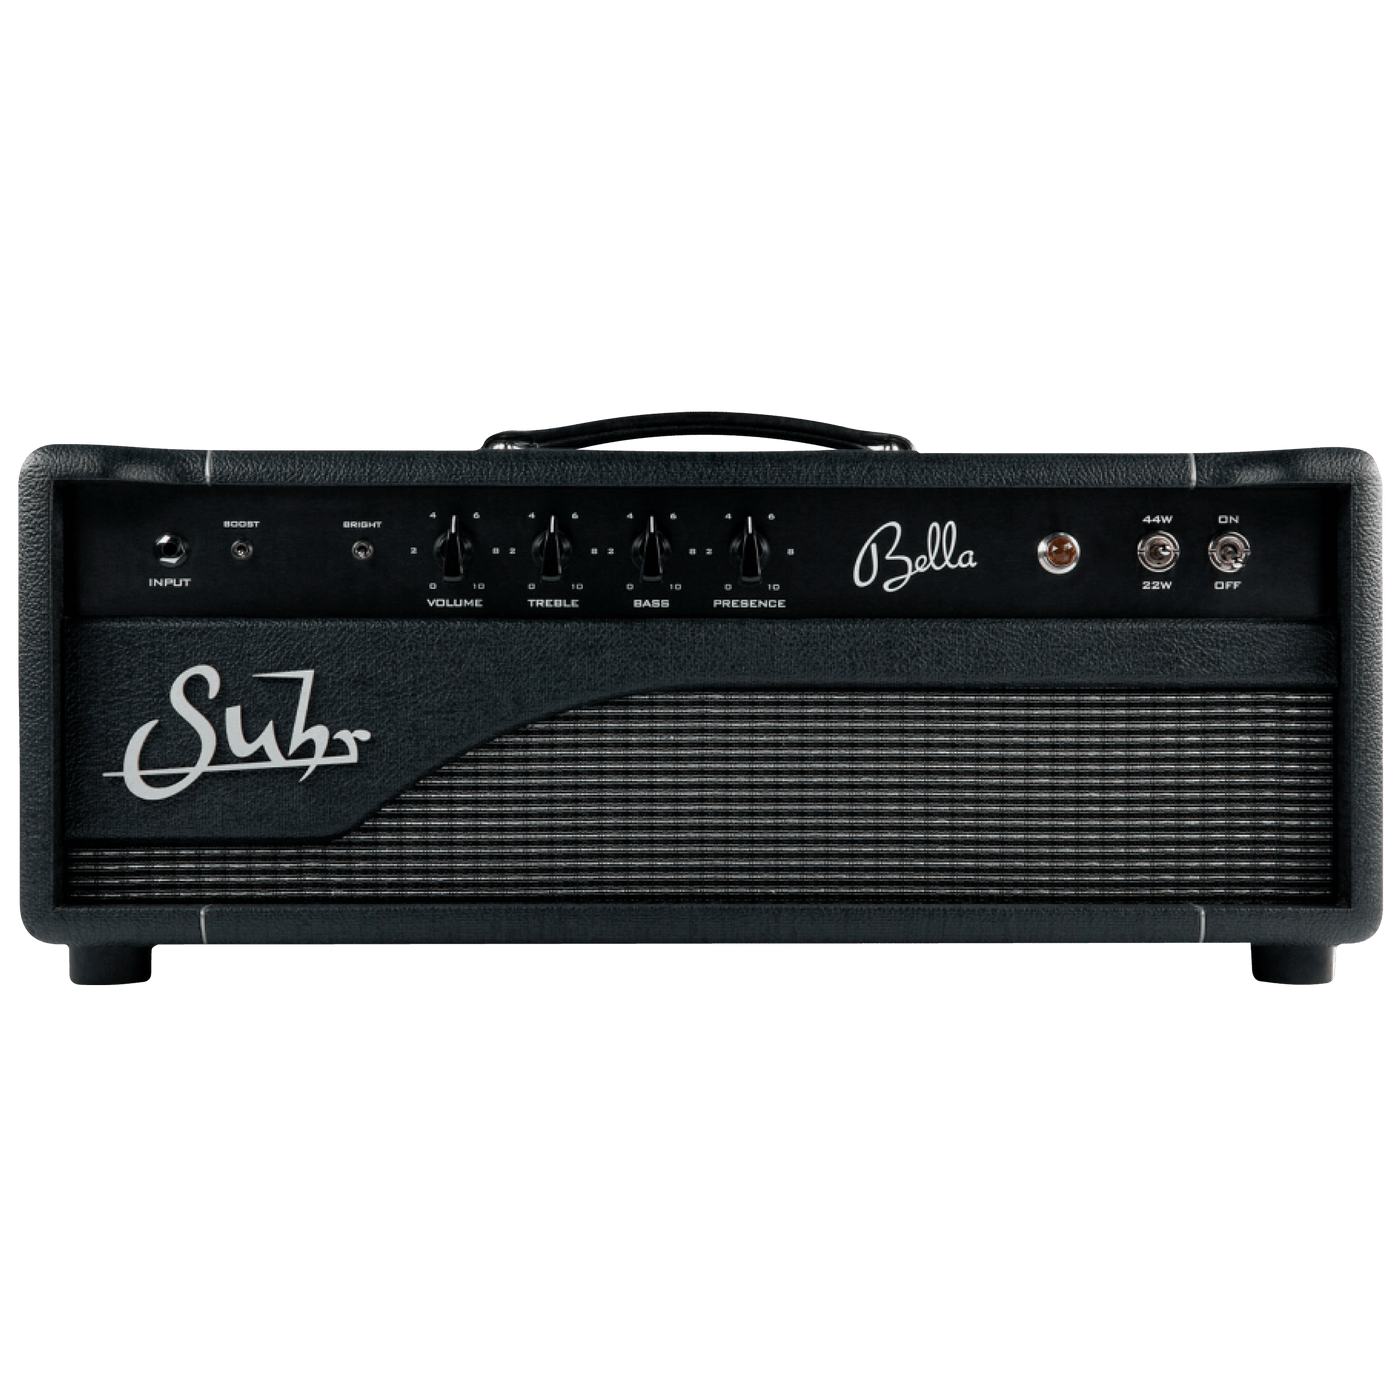 Suhr Bella Head - $1999990 - Gearhub - Bella is a portable, American voiced, hand-wired, all-tube amplifier, designed to be the ideal grab-n-go amplifier and the ultimate platform for your pedalboard. Bella’s simple and easy to use controls (including Boost and 3-position Bright switch) make it a snap to tailor the amp to your favorite boost, overdrive, fuzz and distortion pedals; while the effects loop is the ideal place for all of your chorus, flange, delay, and reverb pedals.Bella is powered by a duet of